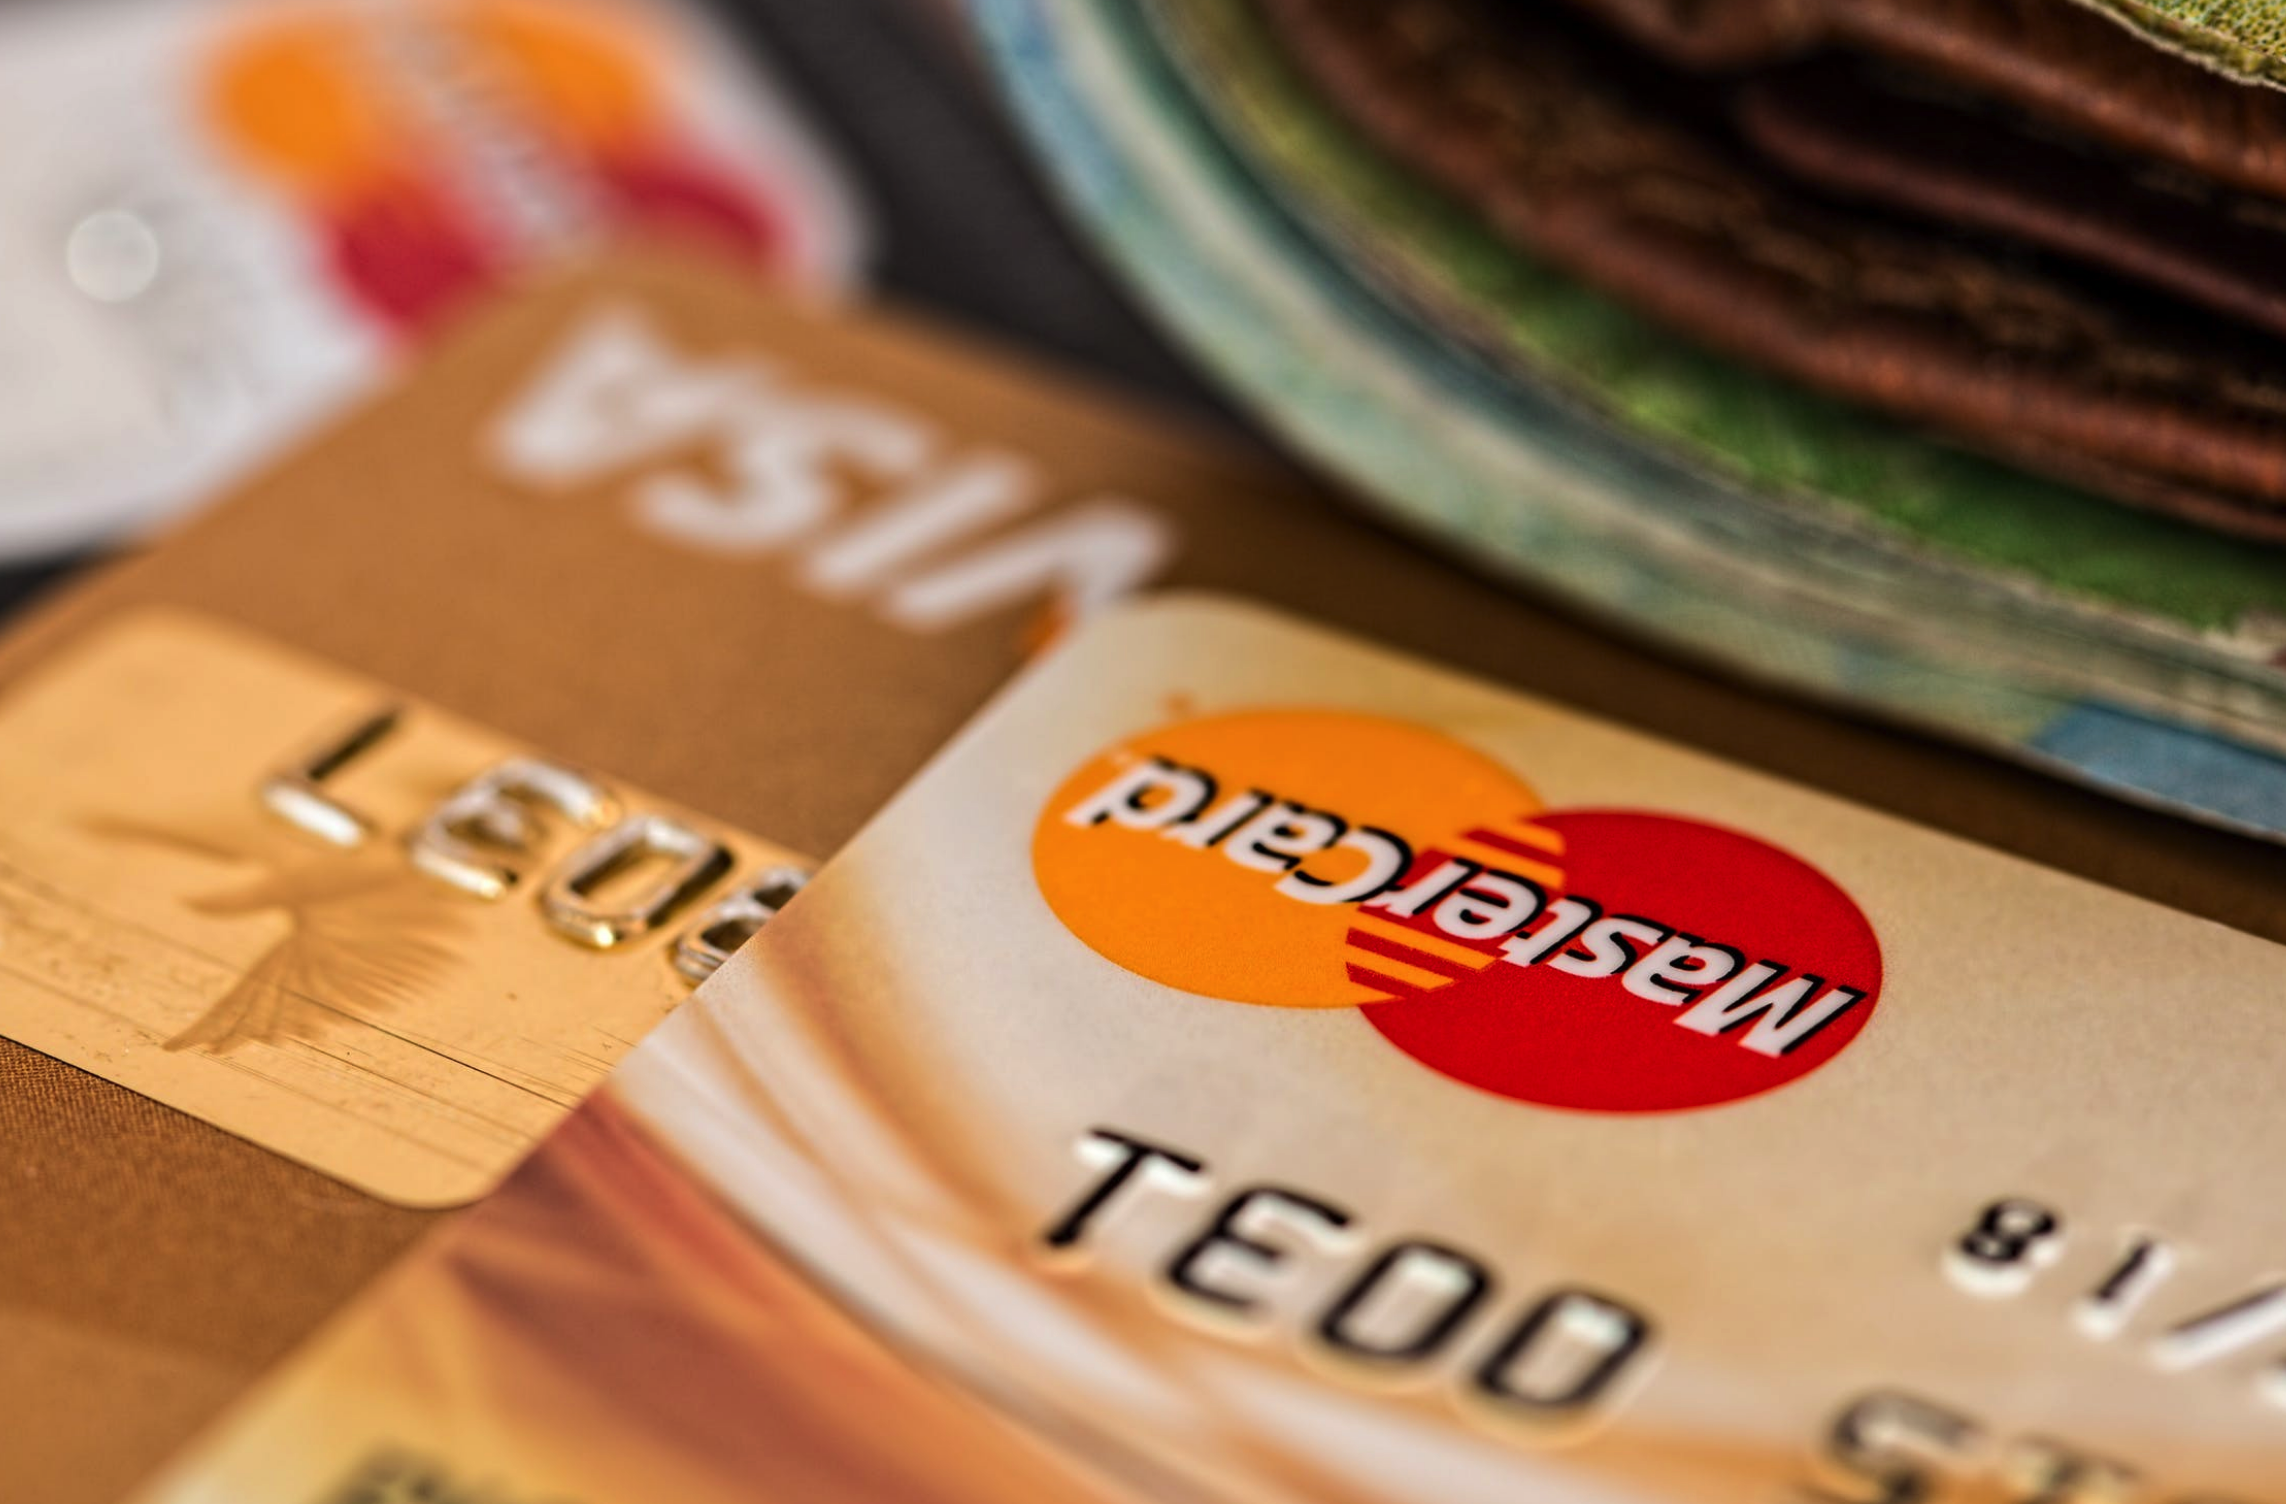 How to prevent credit card fraud | Will Chatham